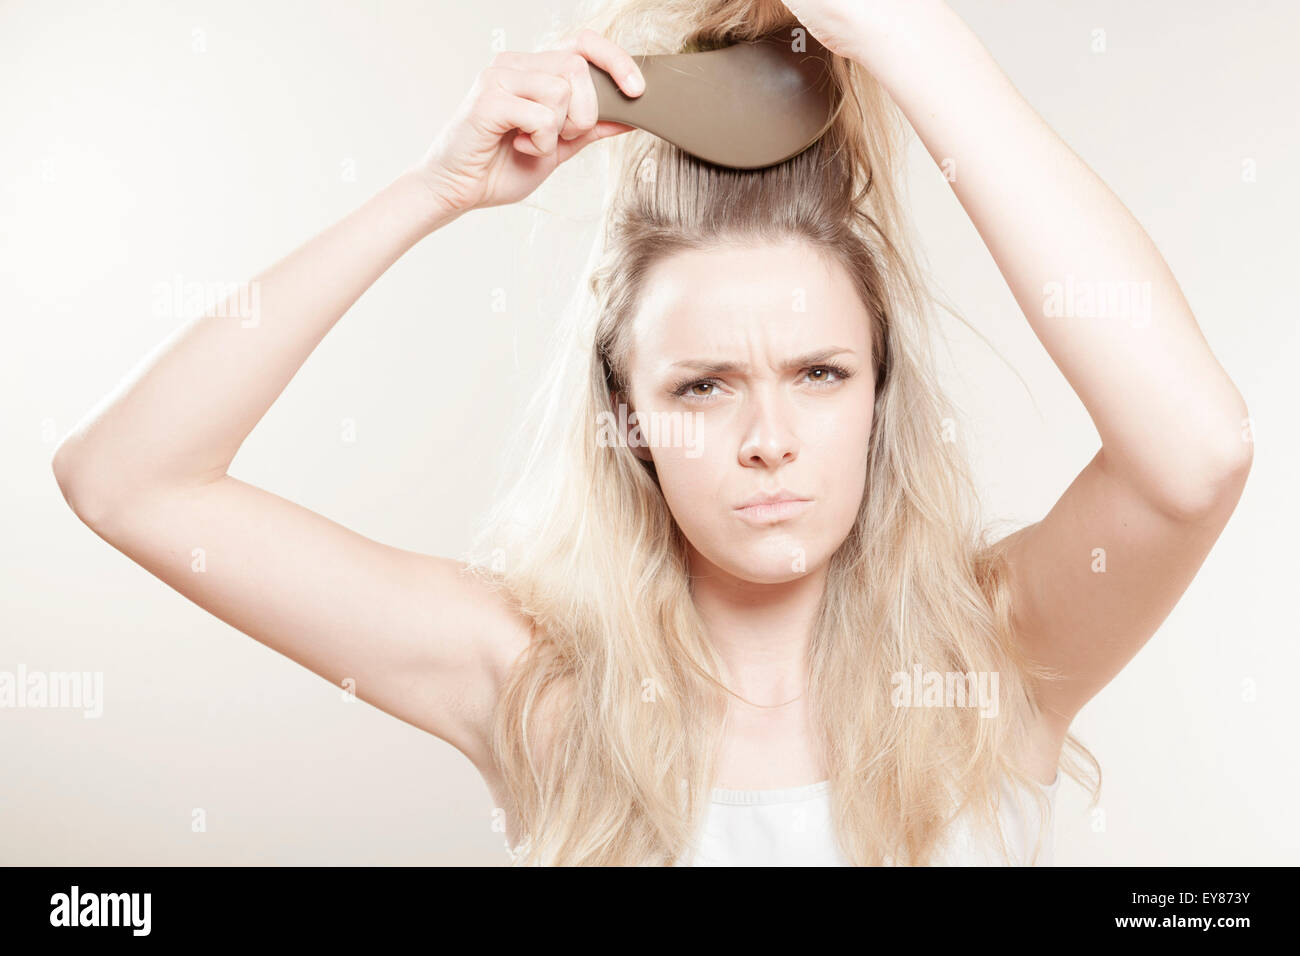 Young woman brushing her hair Stock Photo